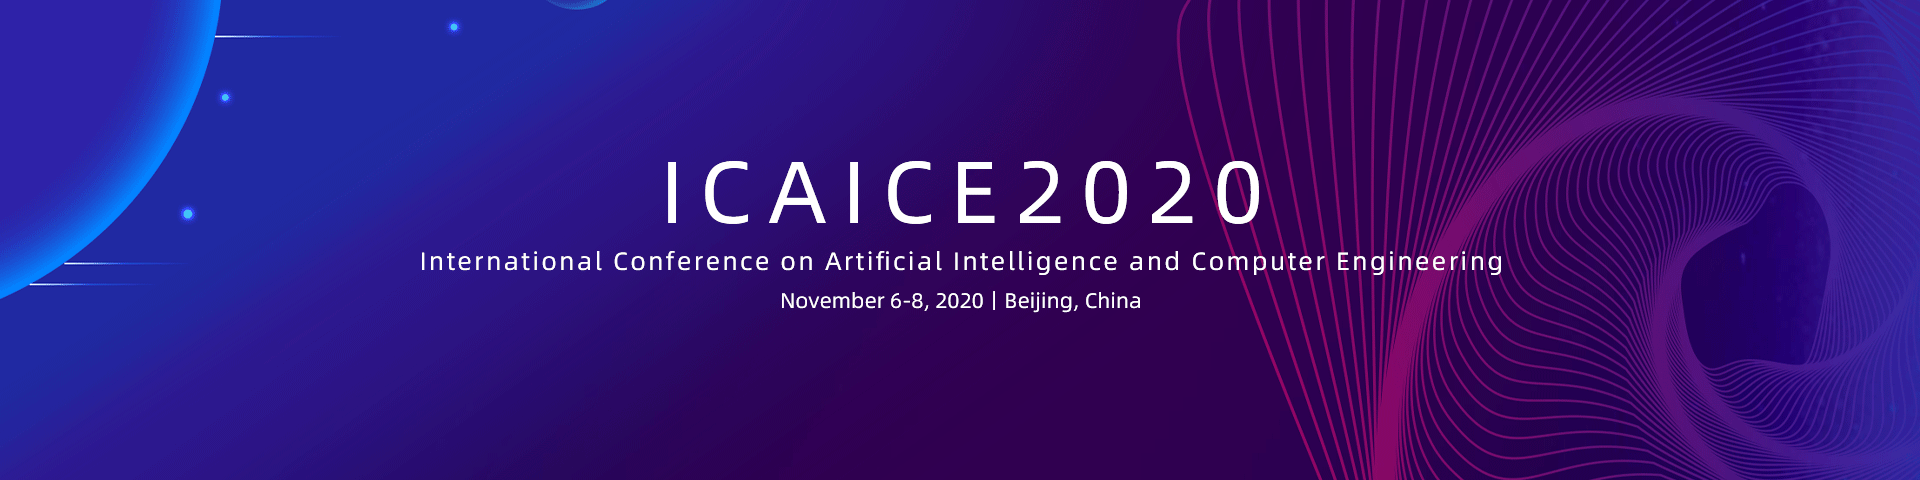 International Conference on Artificial Intelligence and Computer Engineering（ICAICE 2020）, Beijing, China